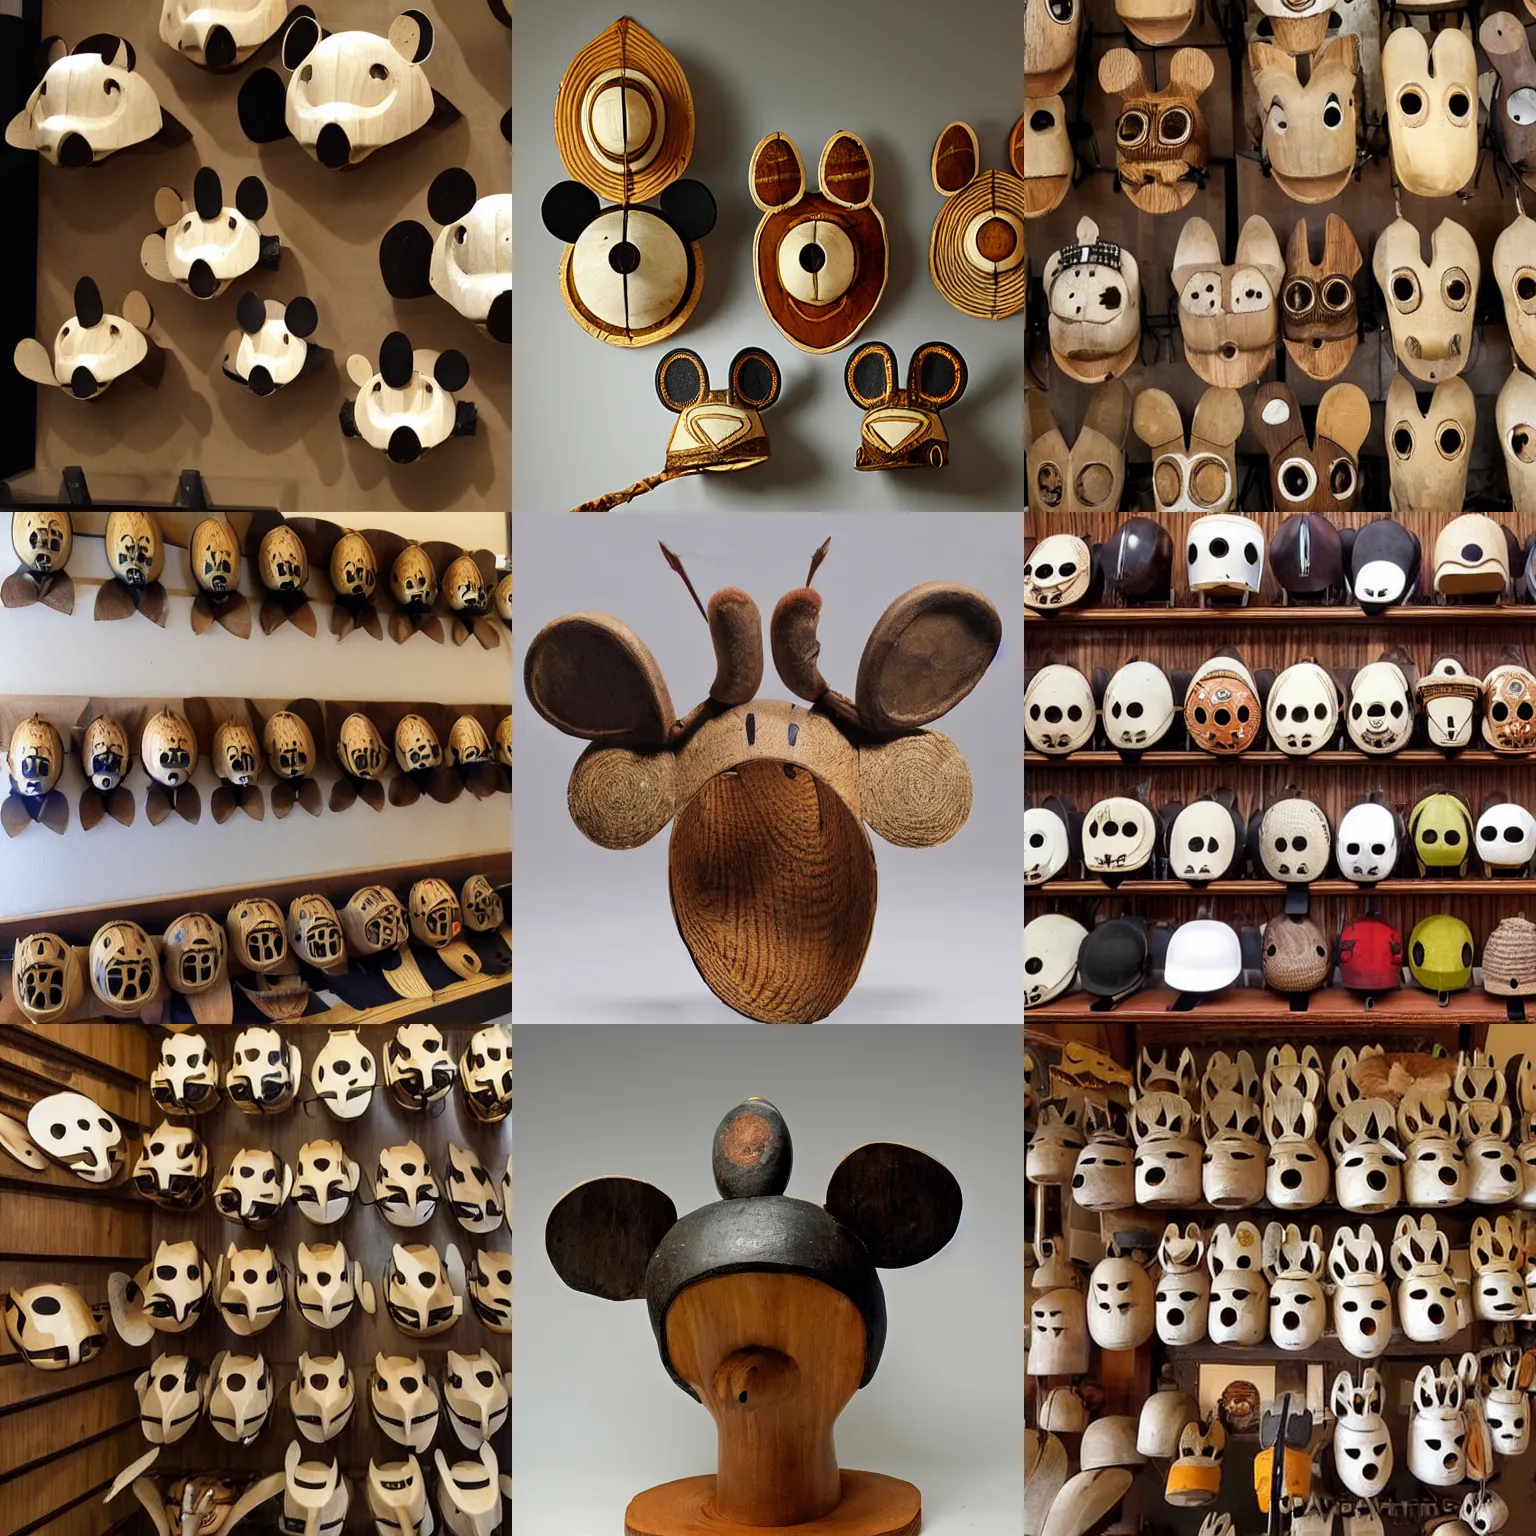 Prompt: Collection of African Traditional Wooden DeadMau5 helmets with ivory ears, Museum Photos